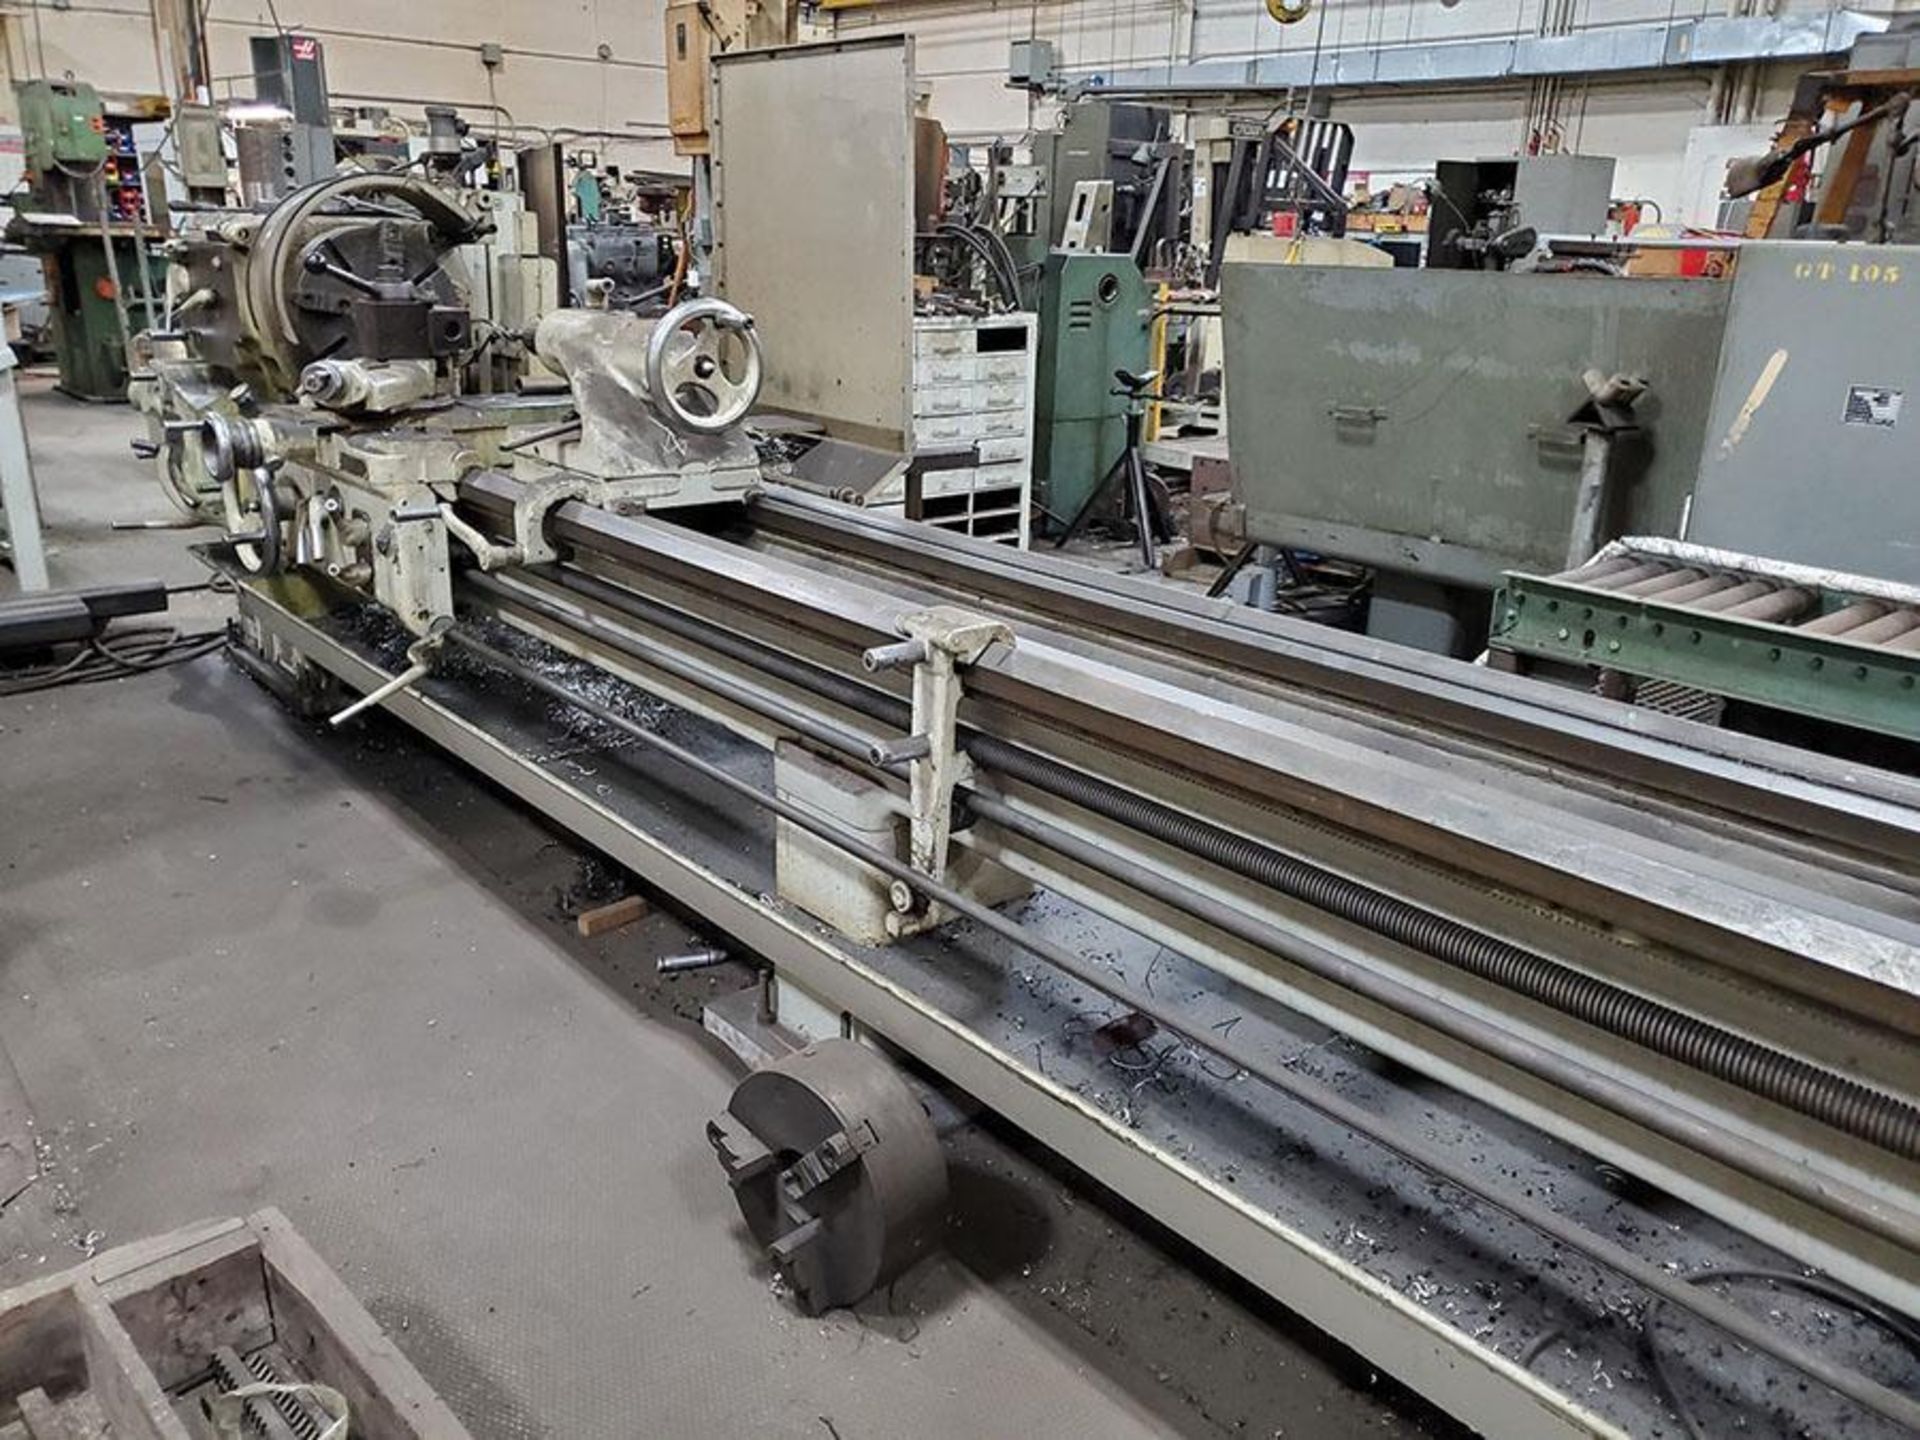 SYDNEY ENGINE LATHE, 16' BED, 2'' BAR THROUGH SPINDLE, 24-720 SPINDLE SPEEDS, TAILSTOCK, CROSS - Image 5 of 18